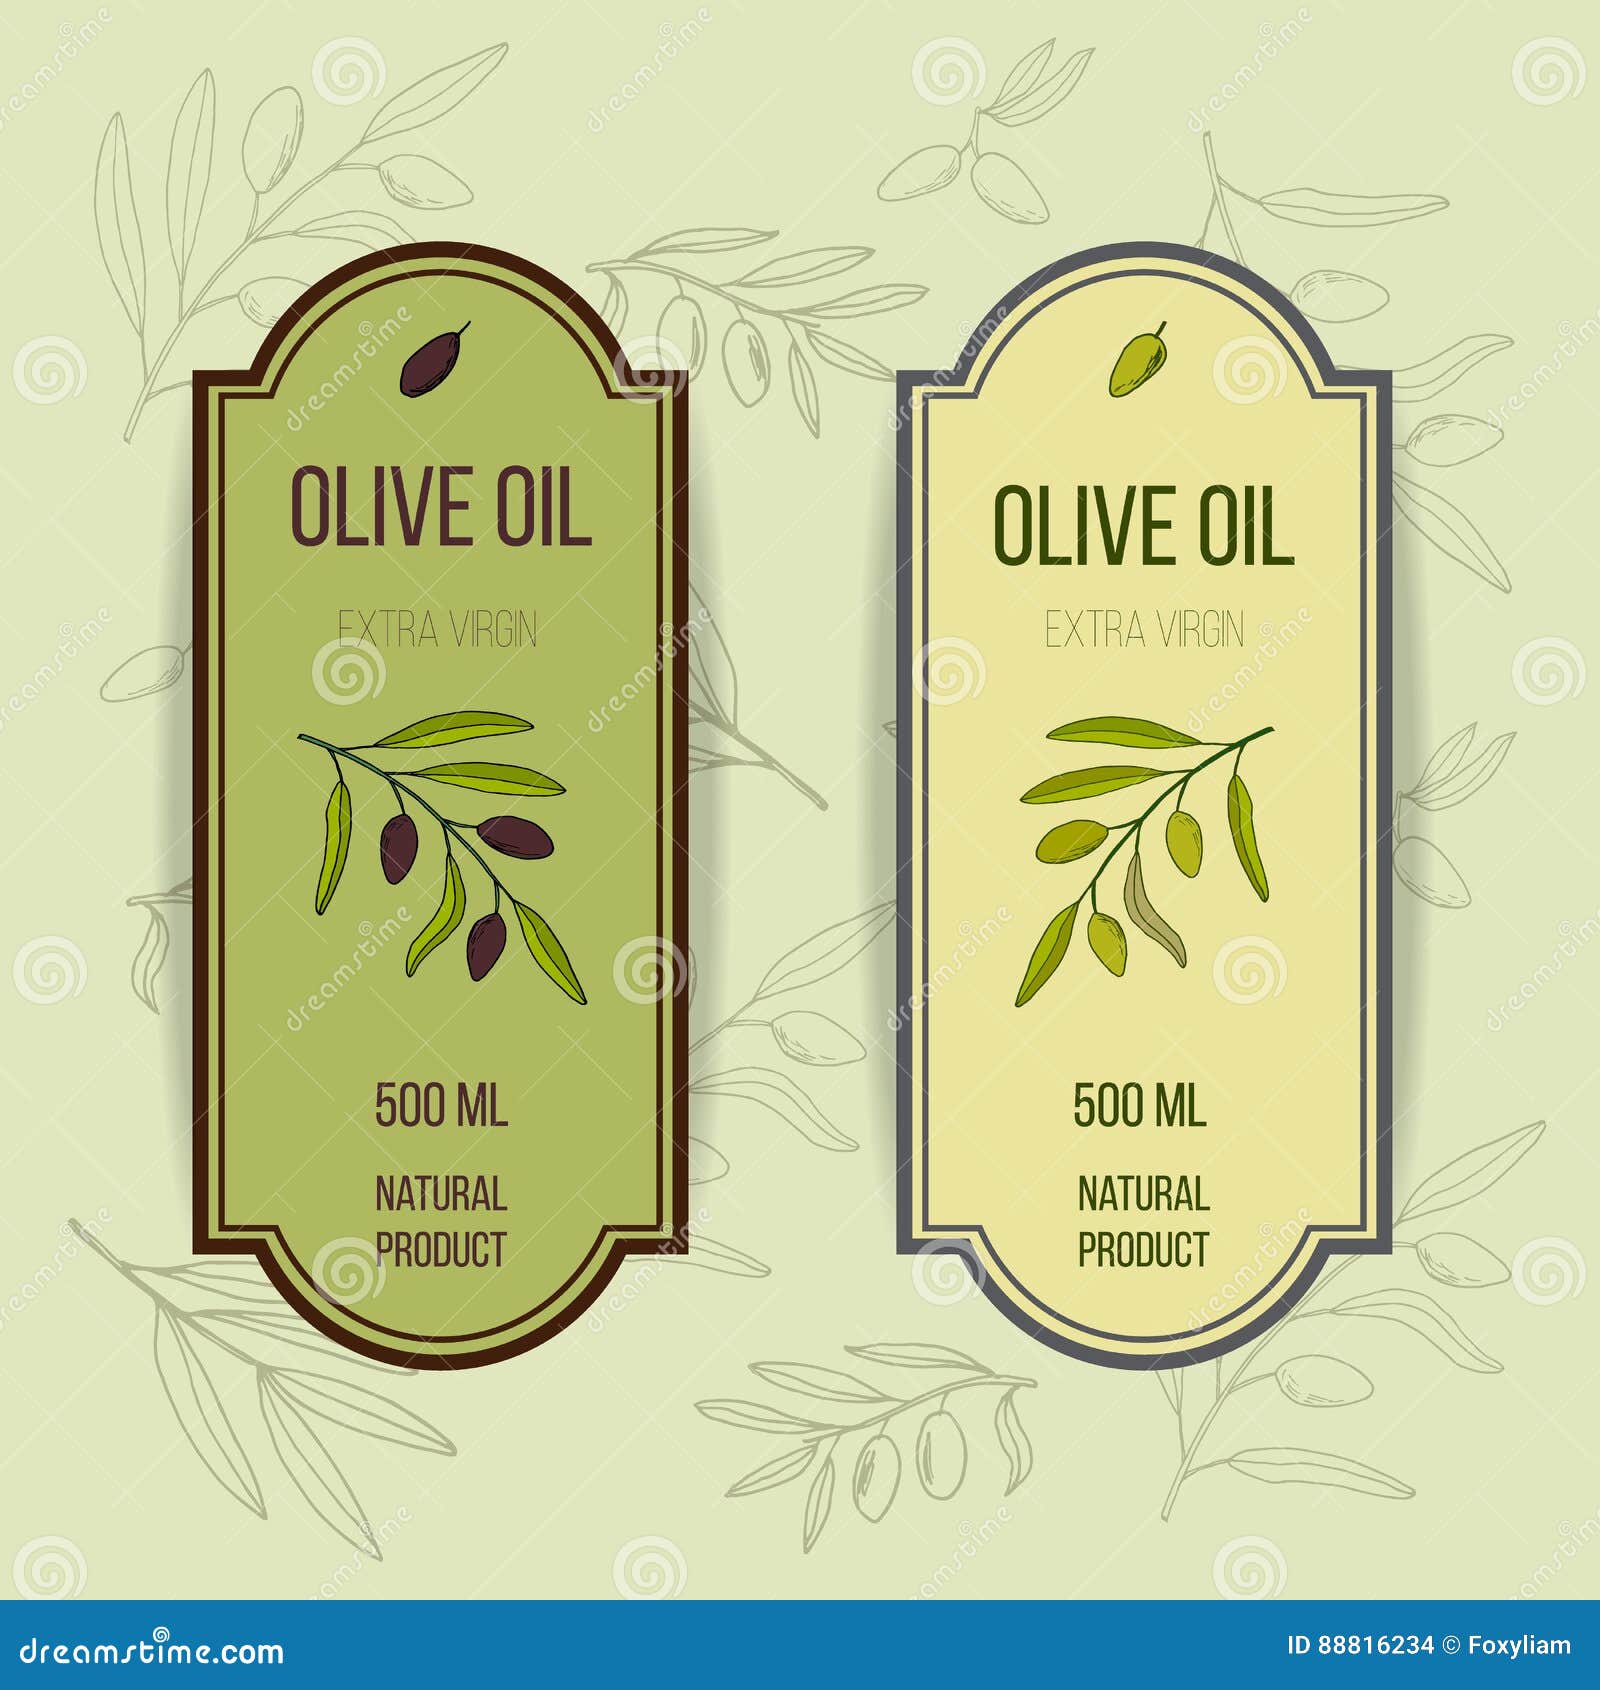 Olive Oil Label Template Stock Vector Illustration Of Graphic 88816234